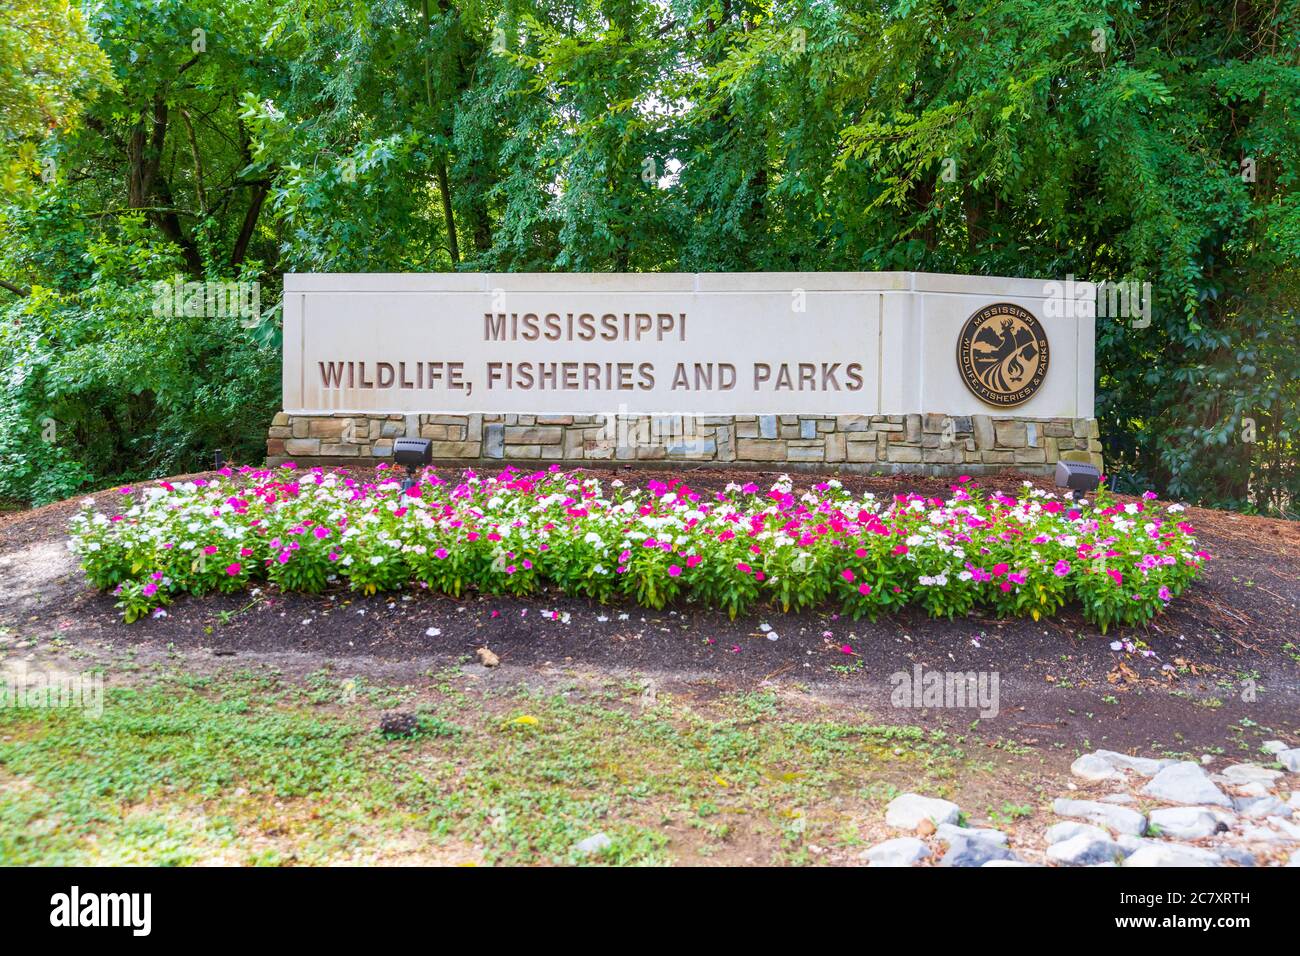 Jackson, MS, USA - July 2, 2020: Mississippi Department of Wildlife, Fisheries and Parks sign outside of headquarters in Jackson, MS. MDWFP. Stock Photo